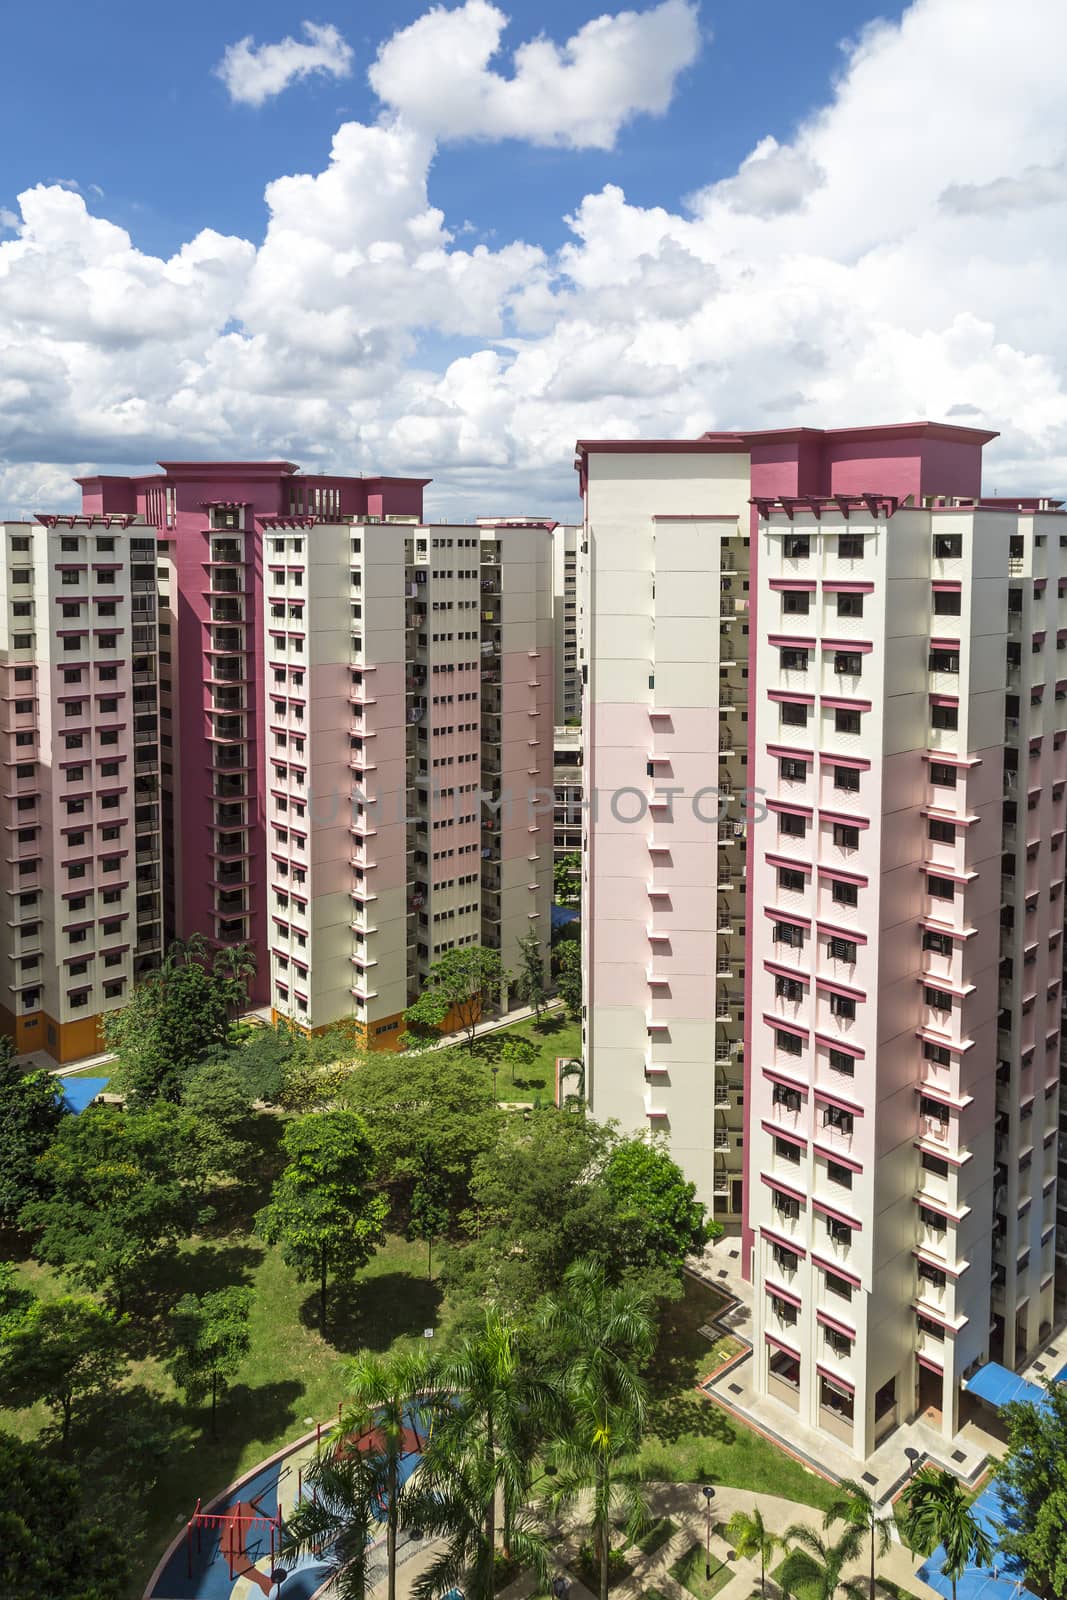 A vertical shot of a pink estate with park and playground.